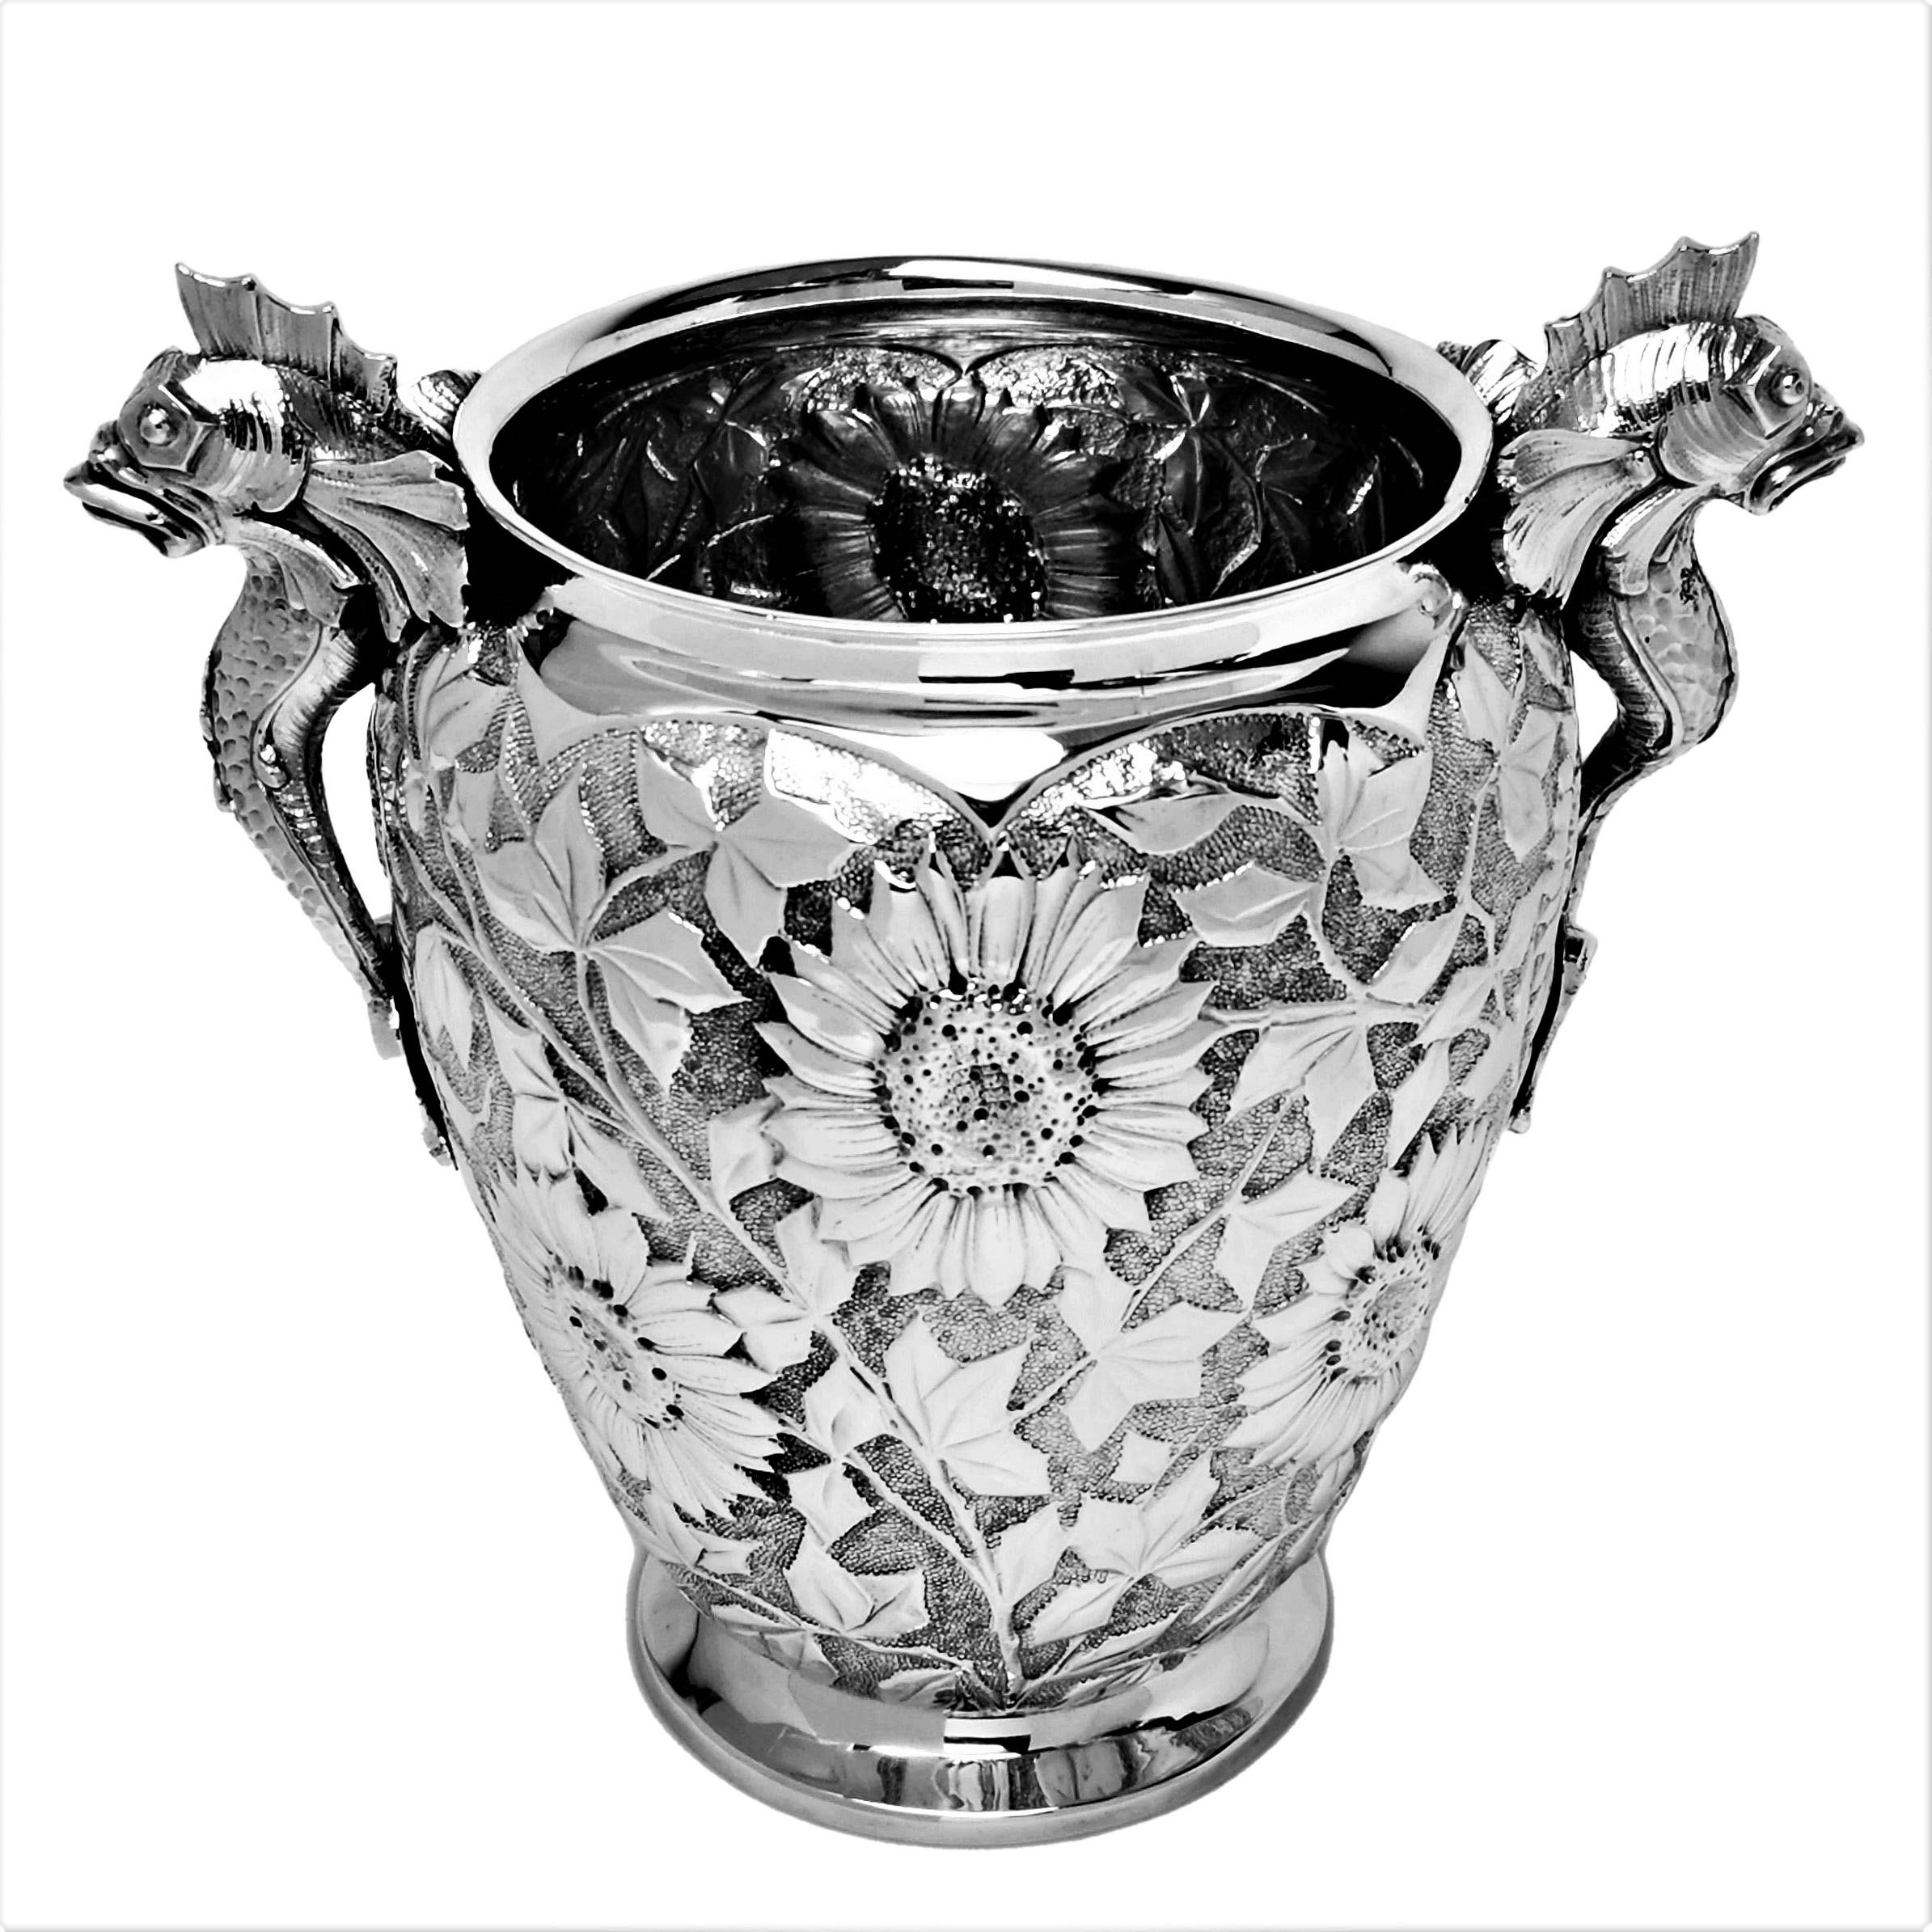 A beautiful vintage solid silver wine cooler with an unusual floral chased design covering the body of the Cooler. The Champagne Ice Bucket has a pair of medieval style fish / dolphins shaped to form handles. This Champagne Cooler is also suitable